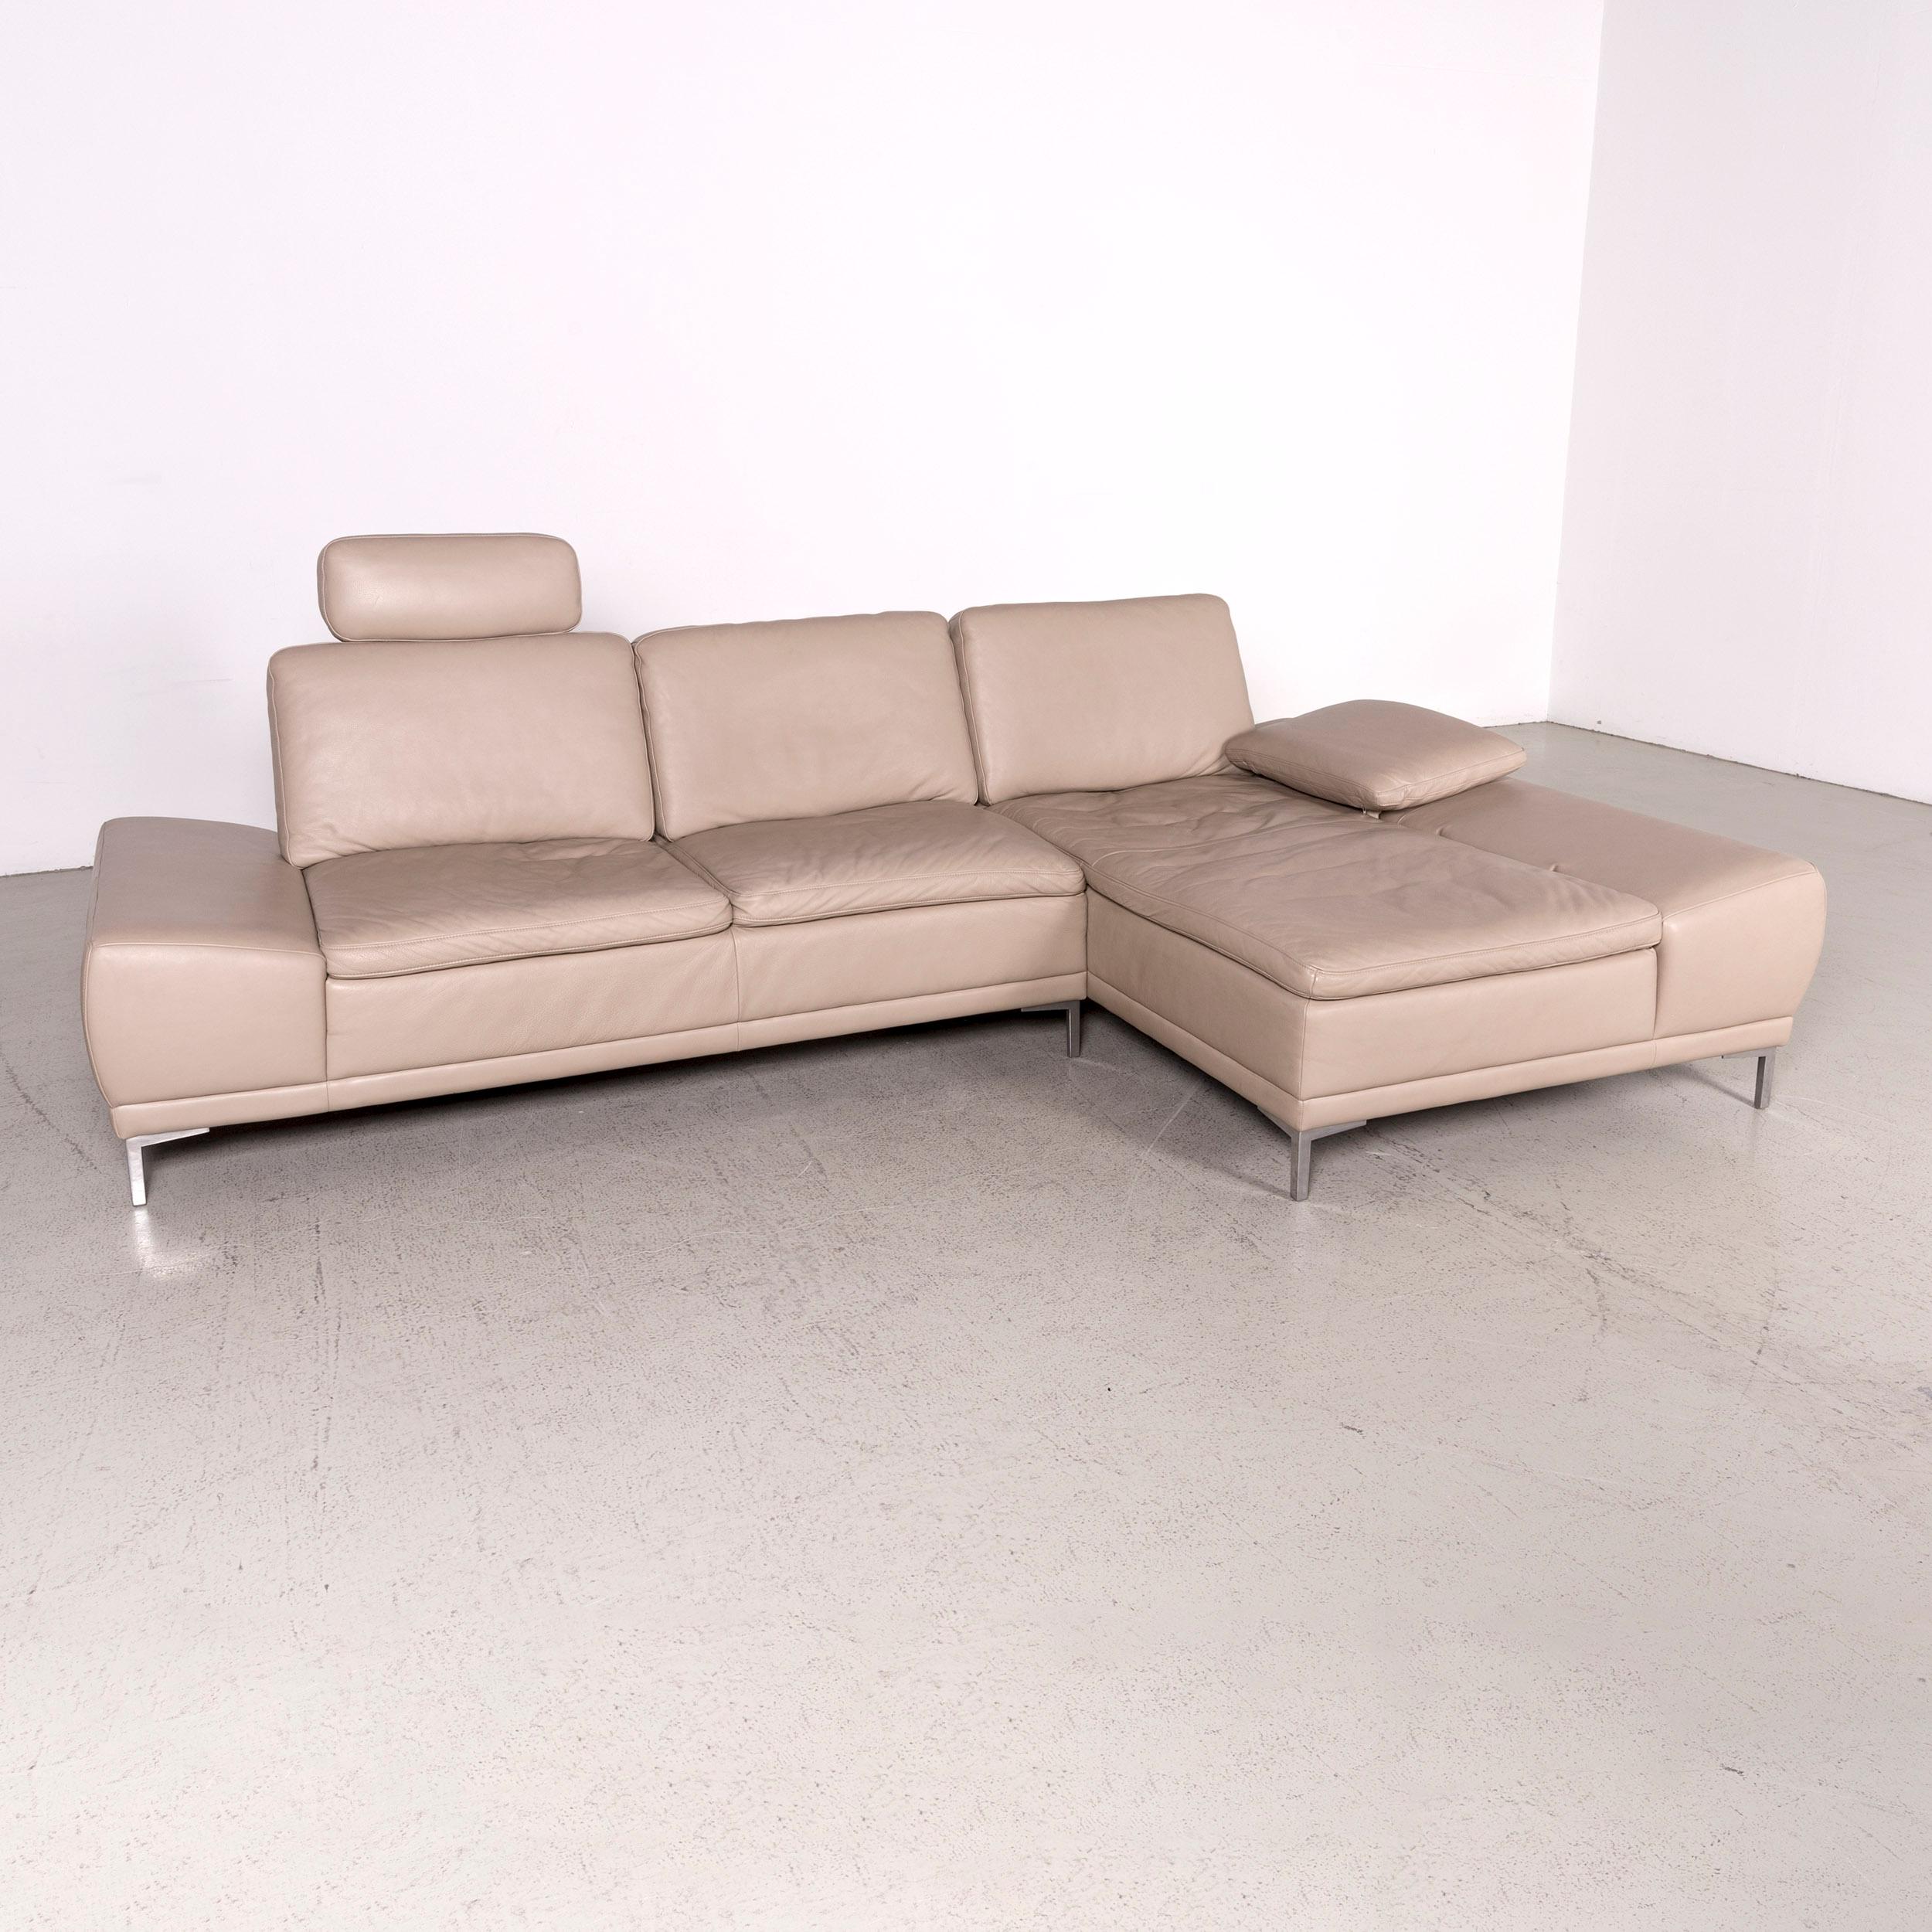 We bring to you a Willi Schillig designer leather corner sofa beige real leather sofa couch.

Product measurements in centimeters:

Depth 175
Width 300
Height 85
Seat-height 45
Rest-height 60
Seat-depth 60
Seat-width 215
Back-height 50.
 